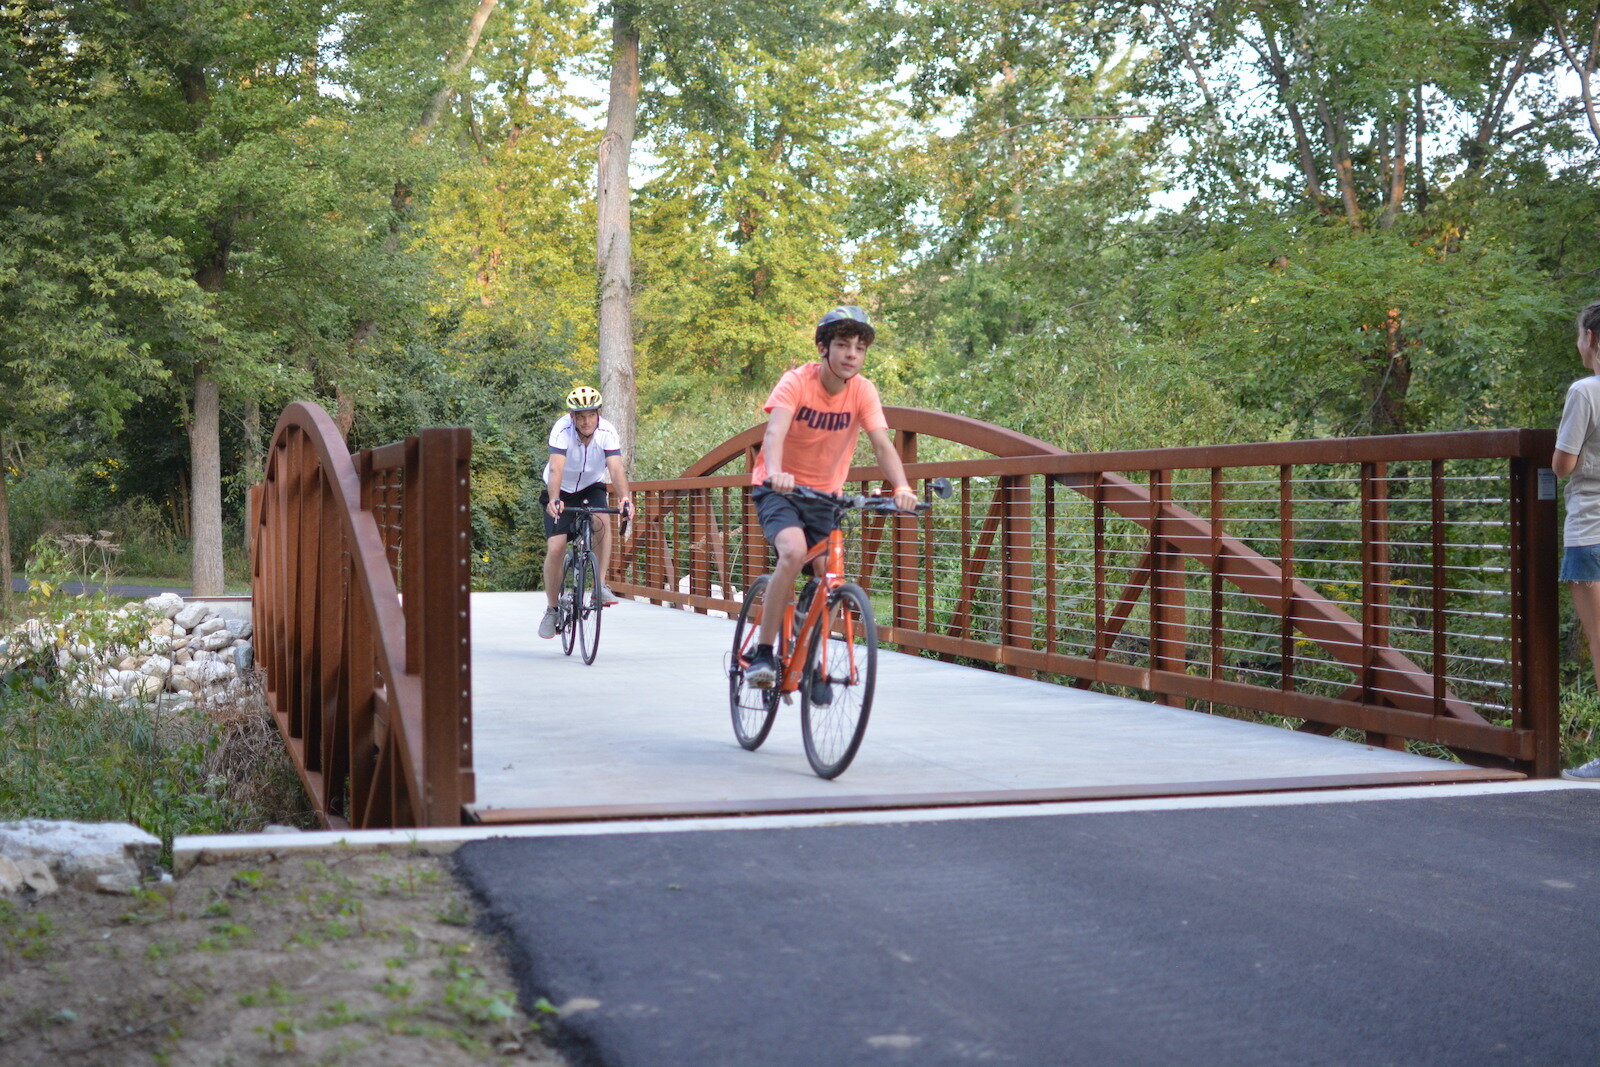 The Dam-to-Dam ride is designed by cyclists and has seven different mileage routes, making it perfect for riders of all abilities to enjoy the beautiful scenery of the Wabash River Trail and the Salamonie State Forest.